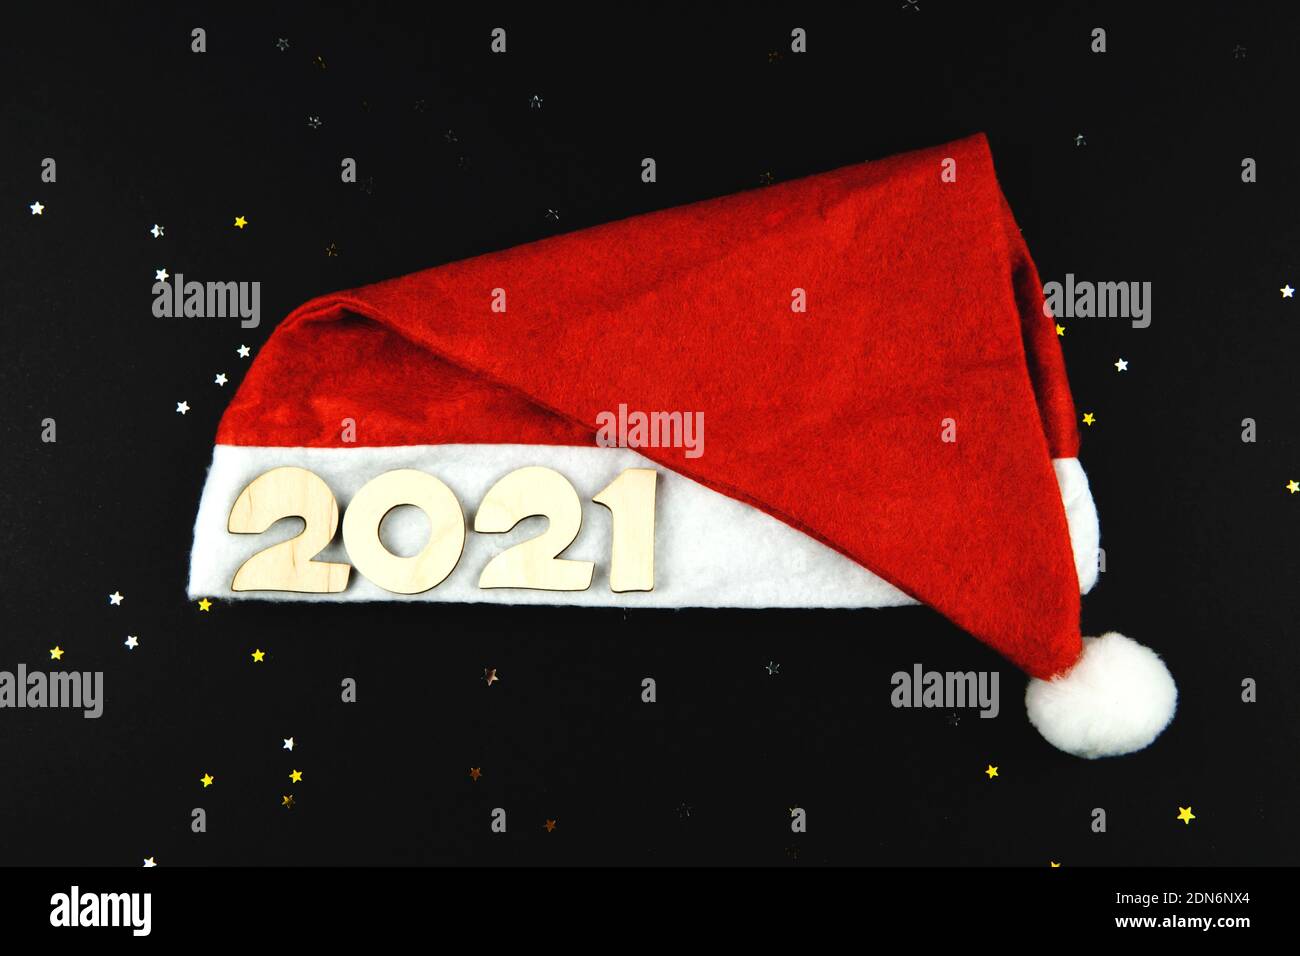 Wooden numbers 2021 on a red Santa hat on a black background with yellow and gray glitter stars. Stock Photo